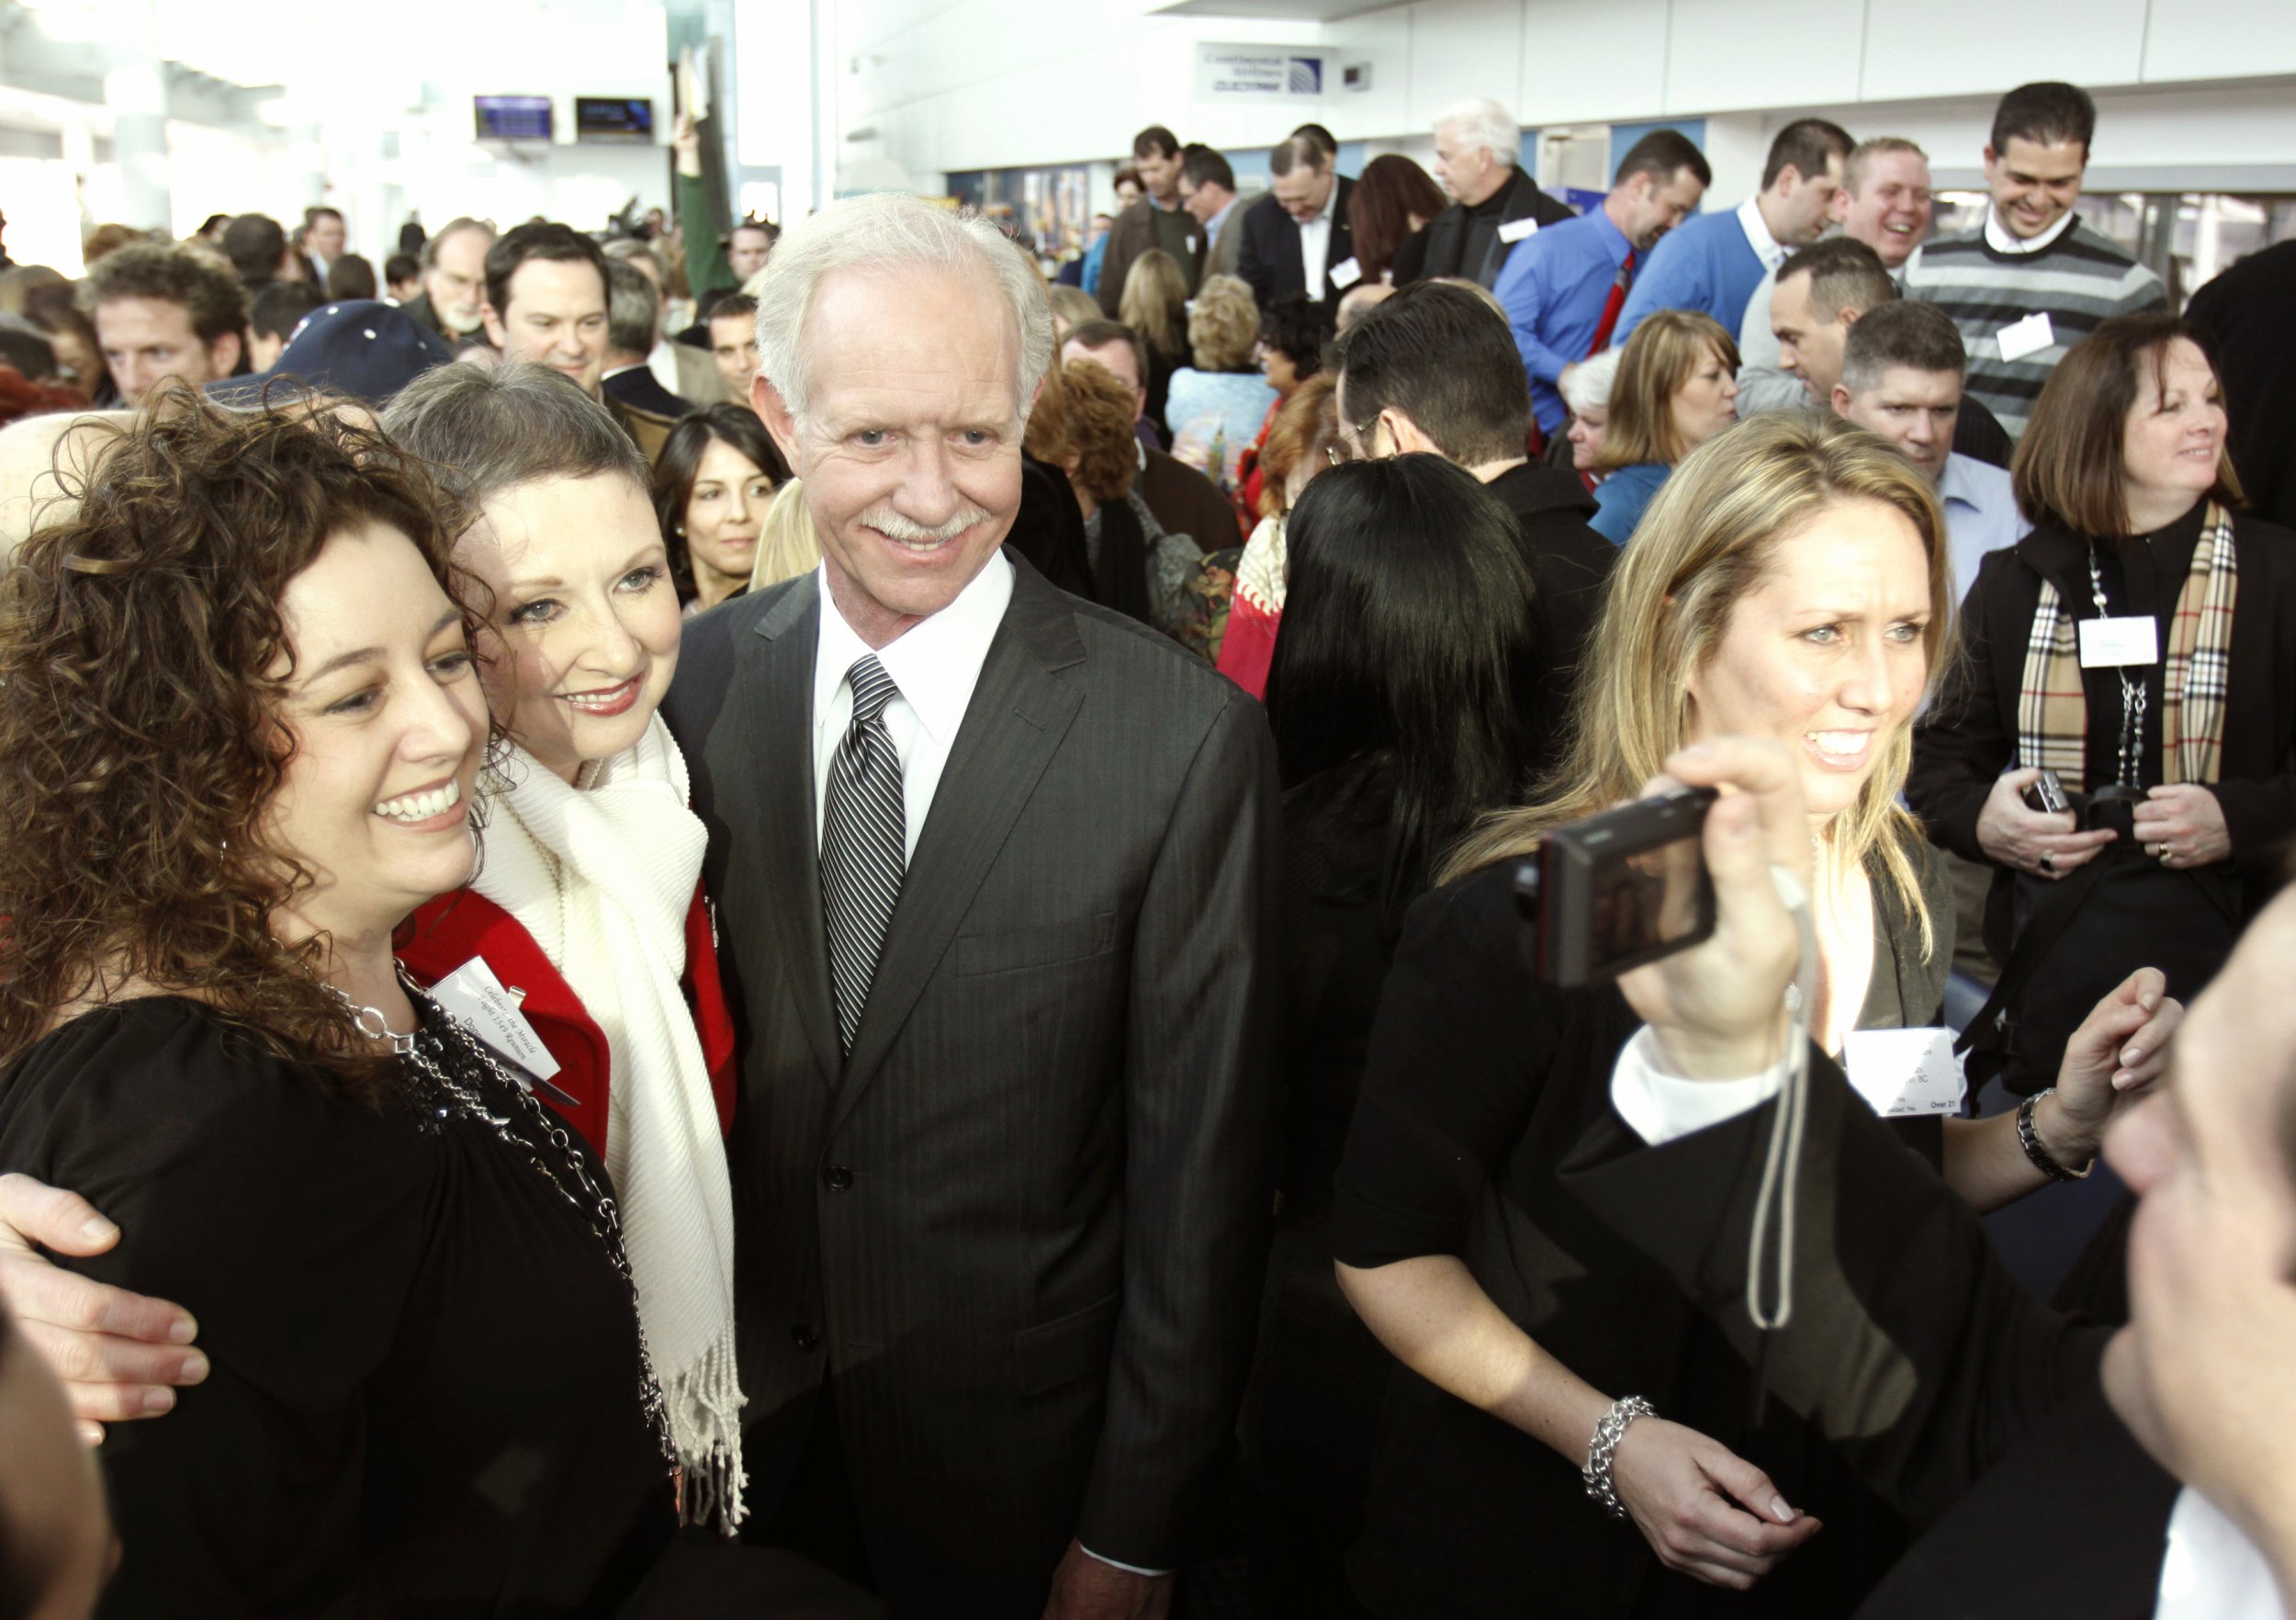 Sully with Passengers